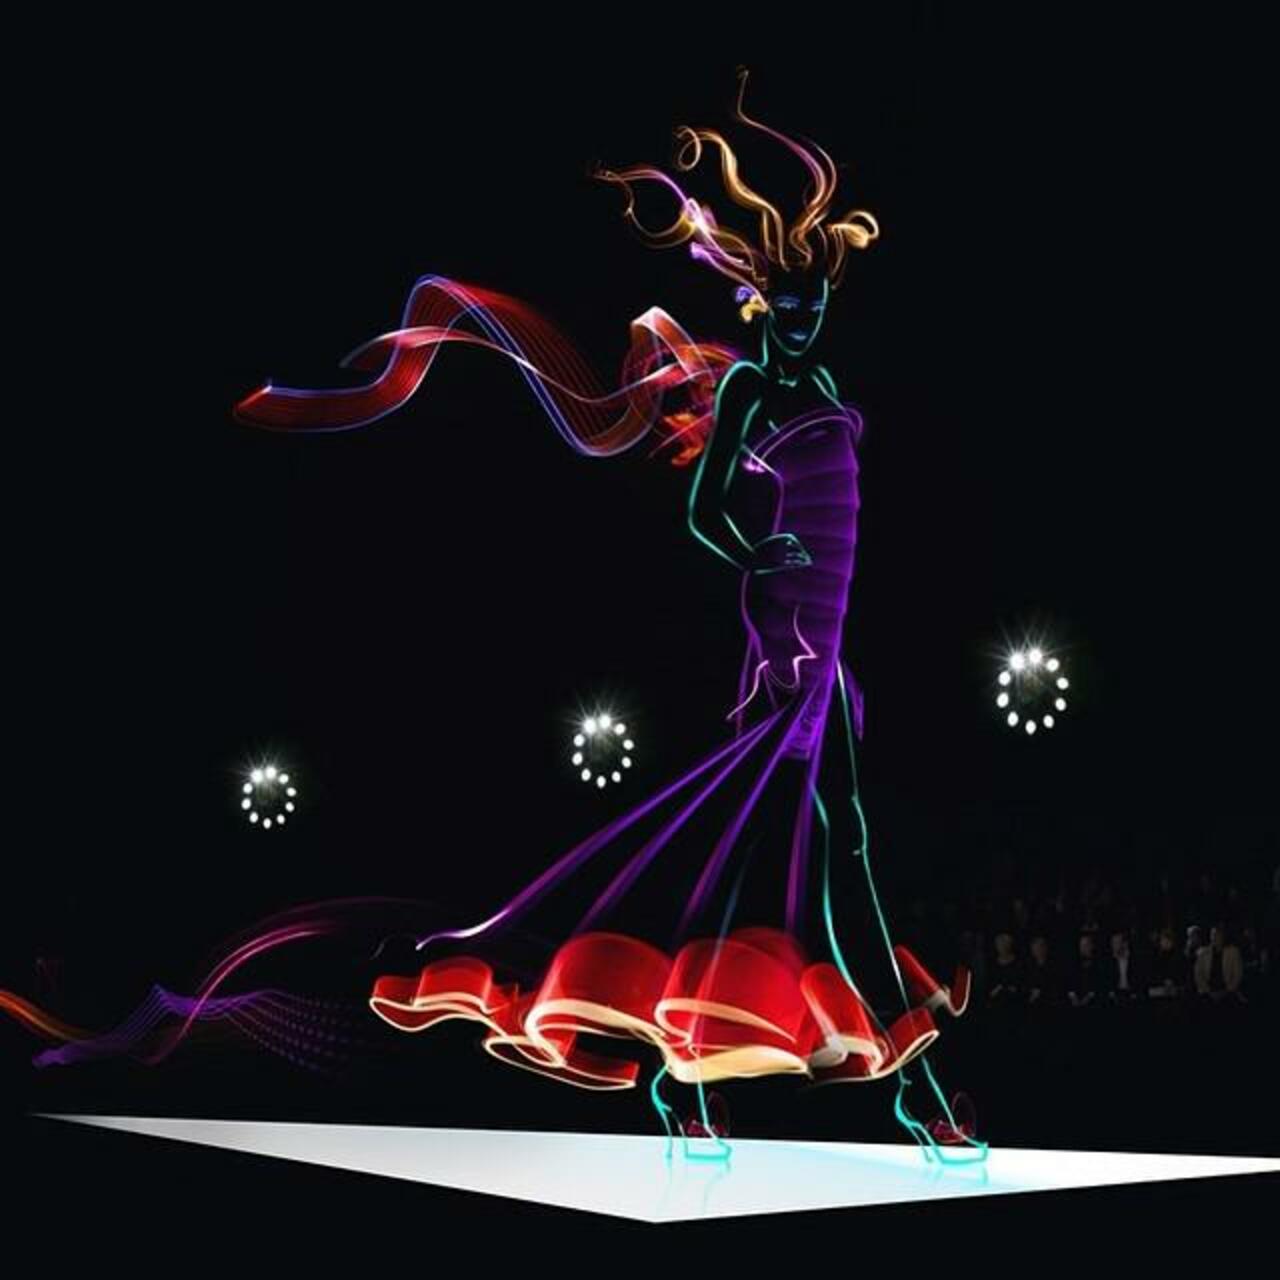 Light trail fashion  Incredible photo by Lichtfaktor #lightart #stayinspired #intotheam http://t.co/NBc2WoB5Kp